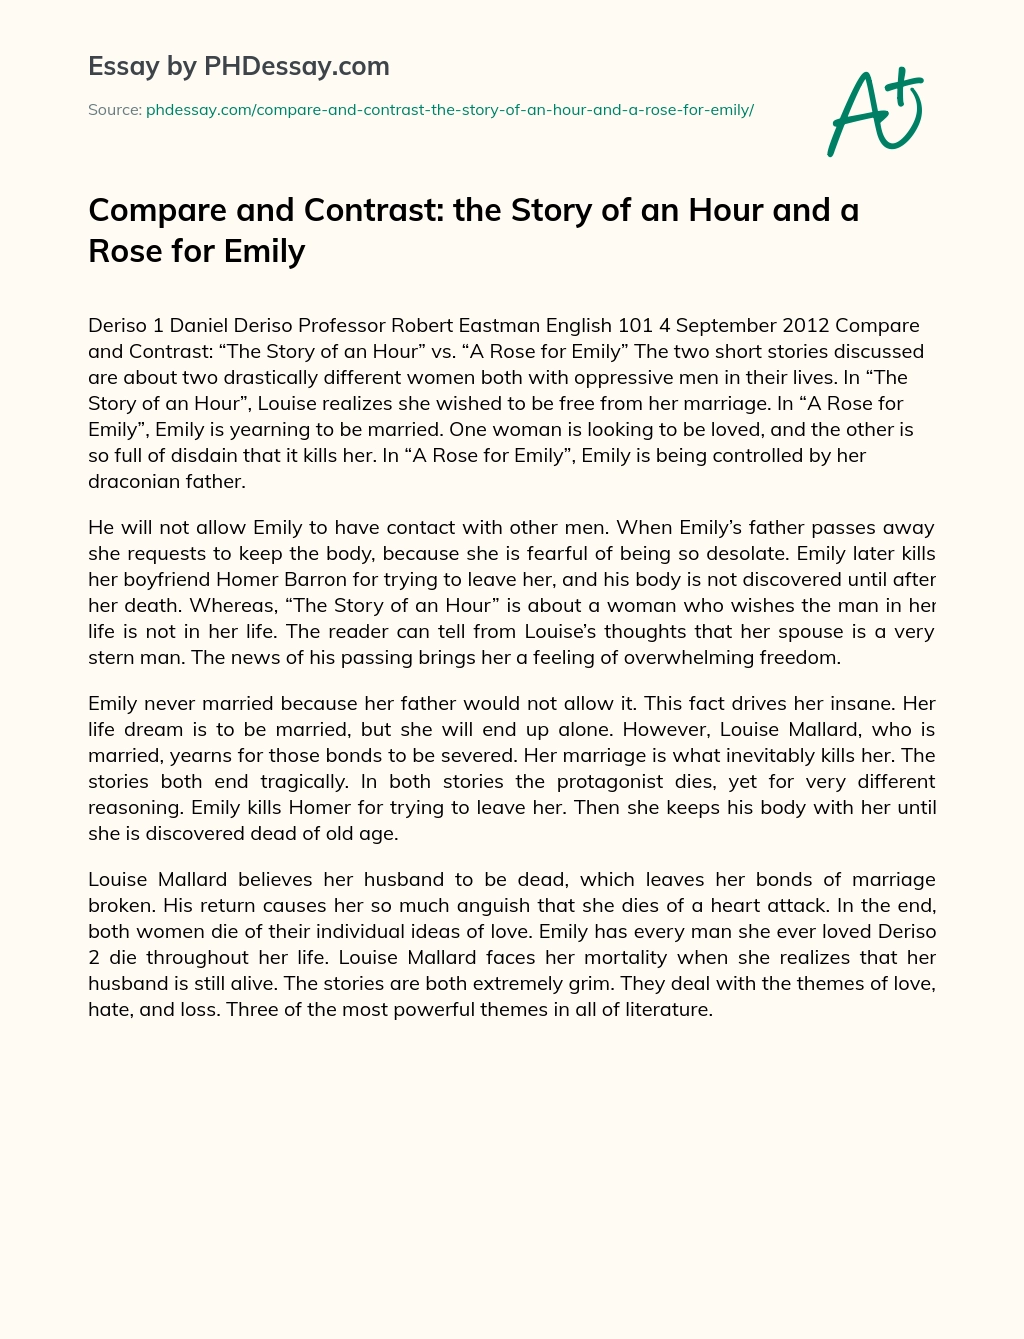 Compare and Contrast: the Story of an Hour and a Rose for Emily essay